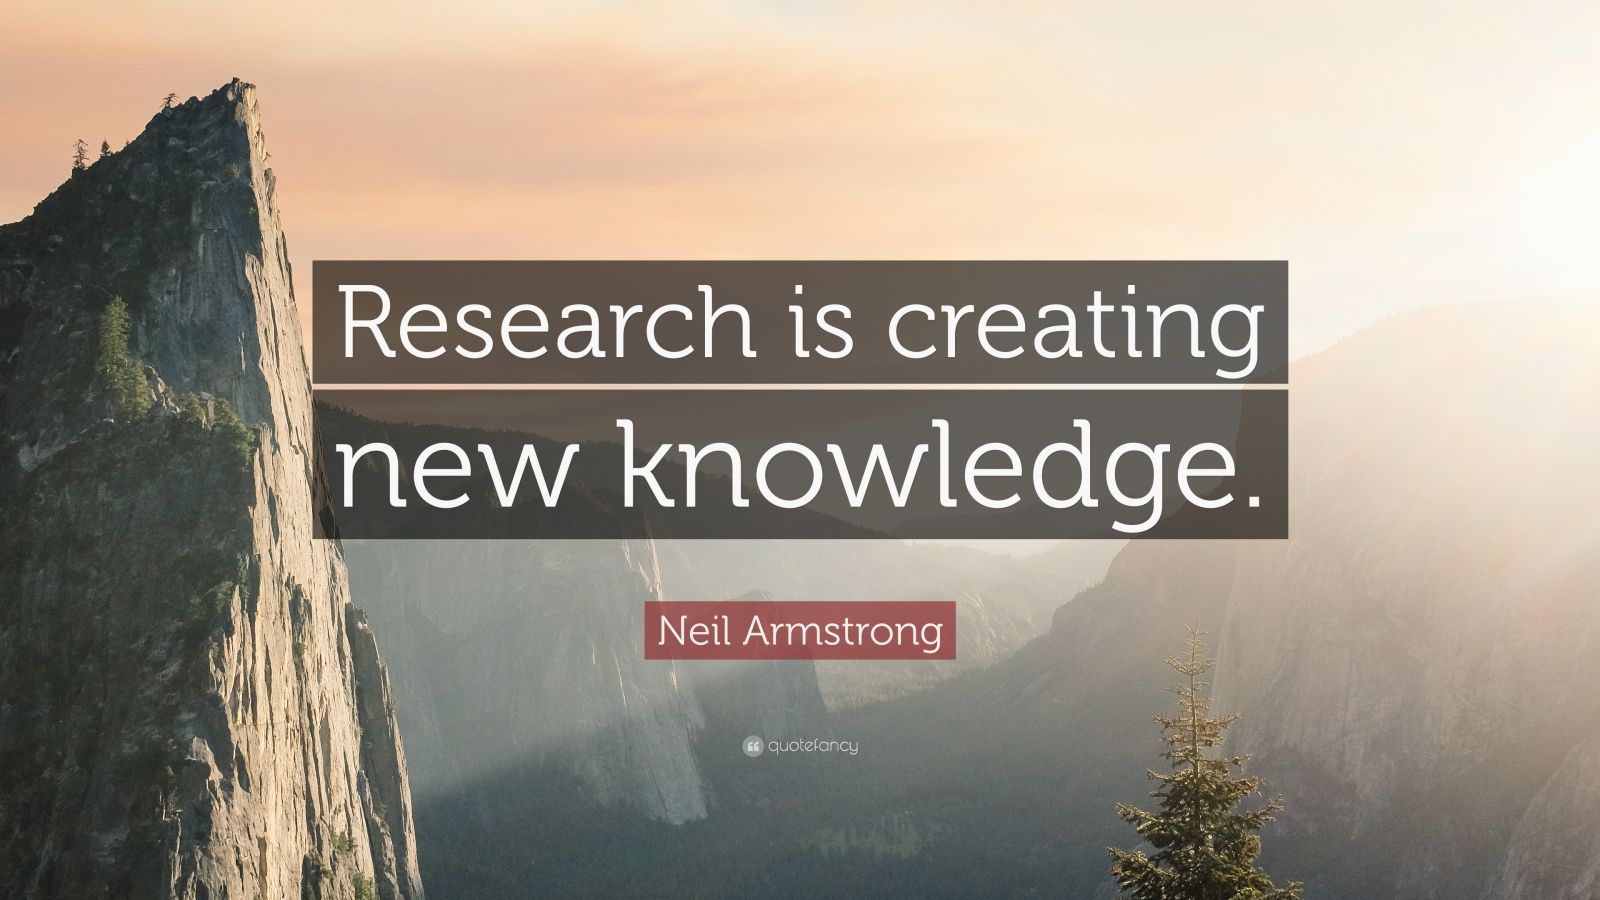 the knowledge gained through research is called